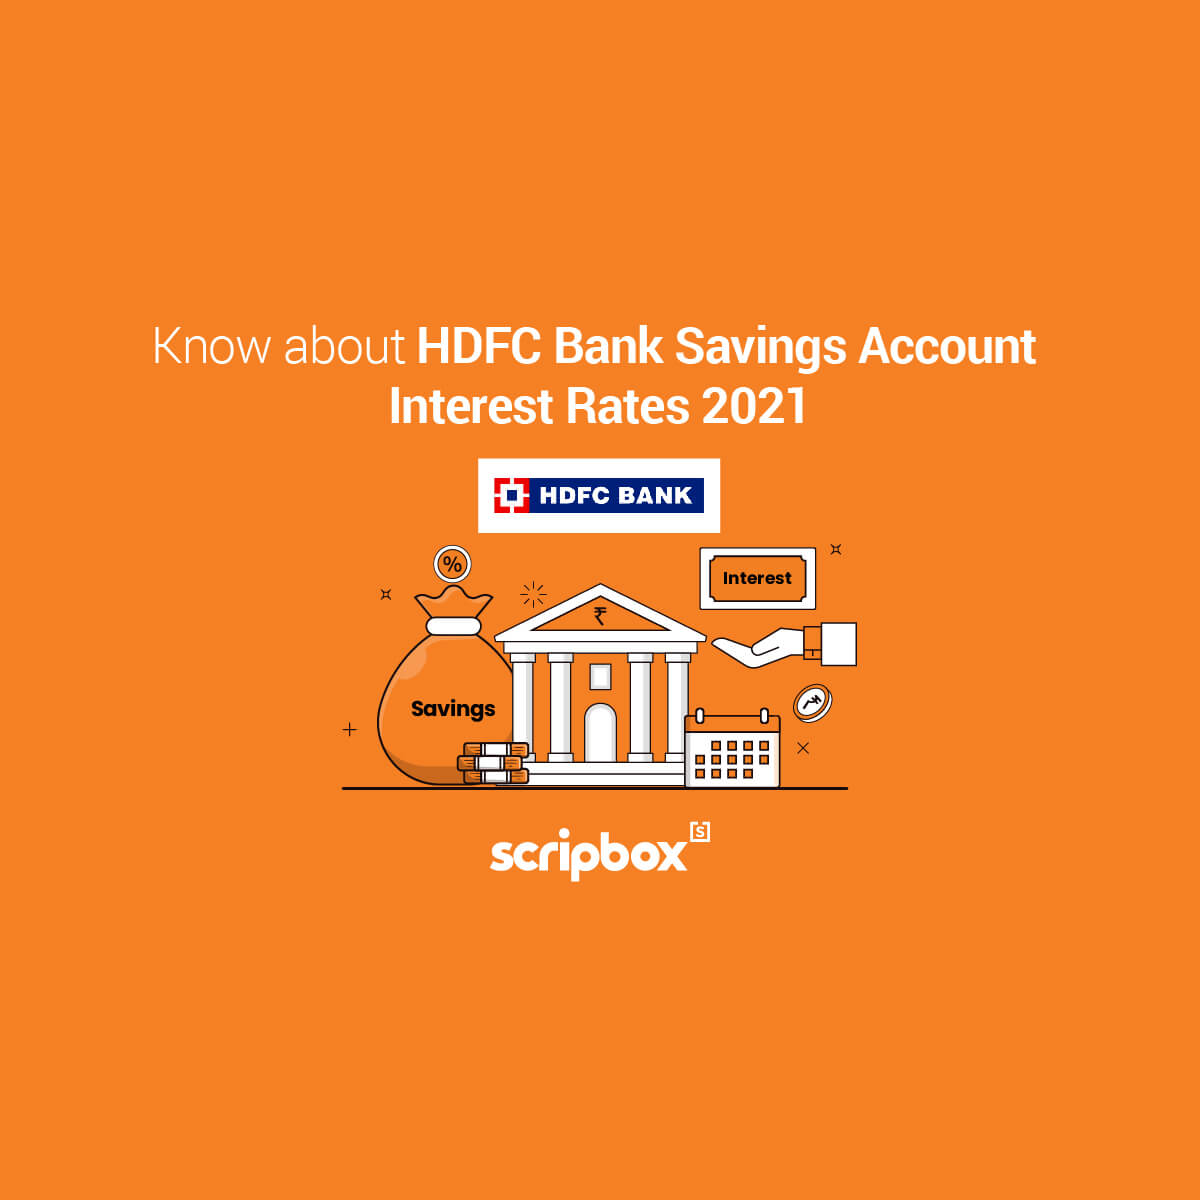 HDFC Savings Account Interest Rates and Minimum Balance Requirements